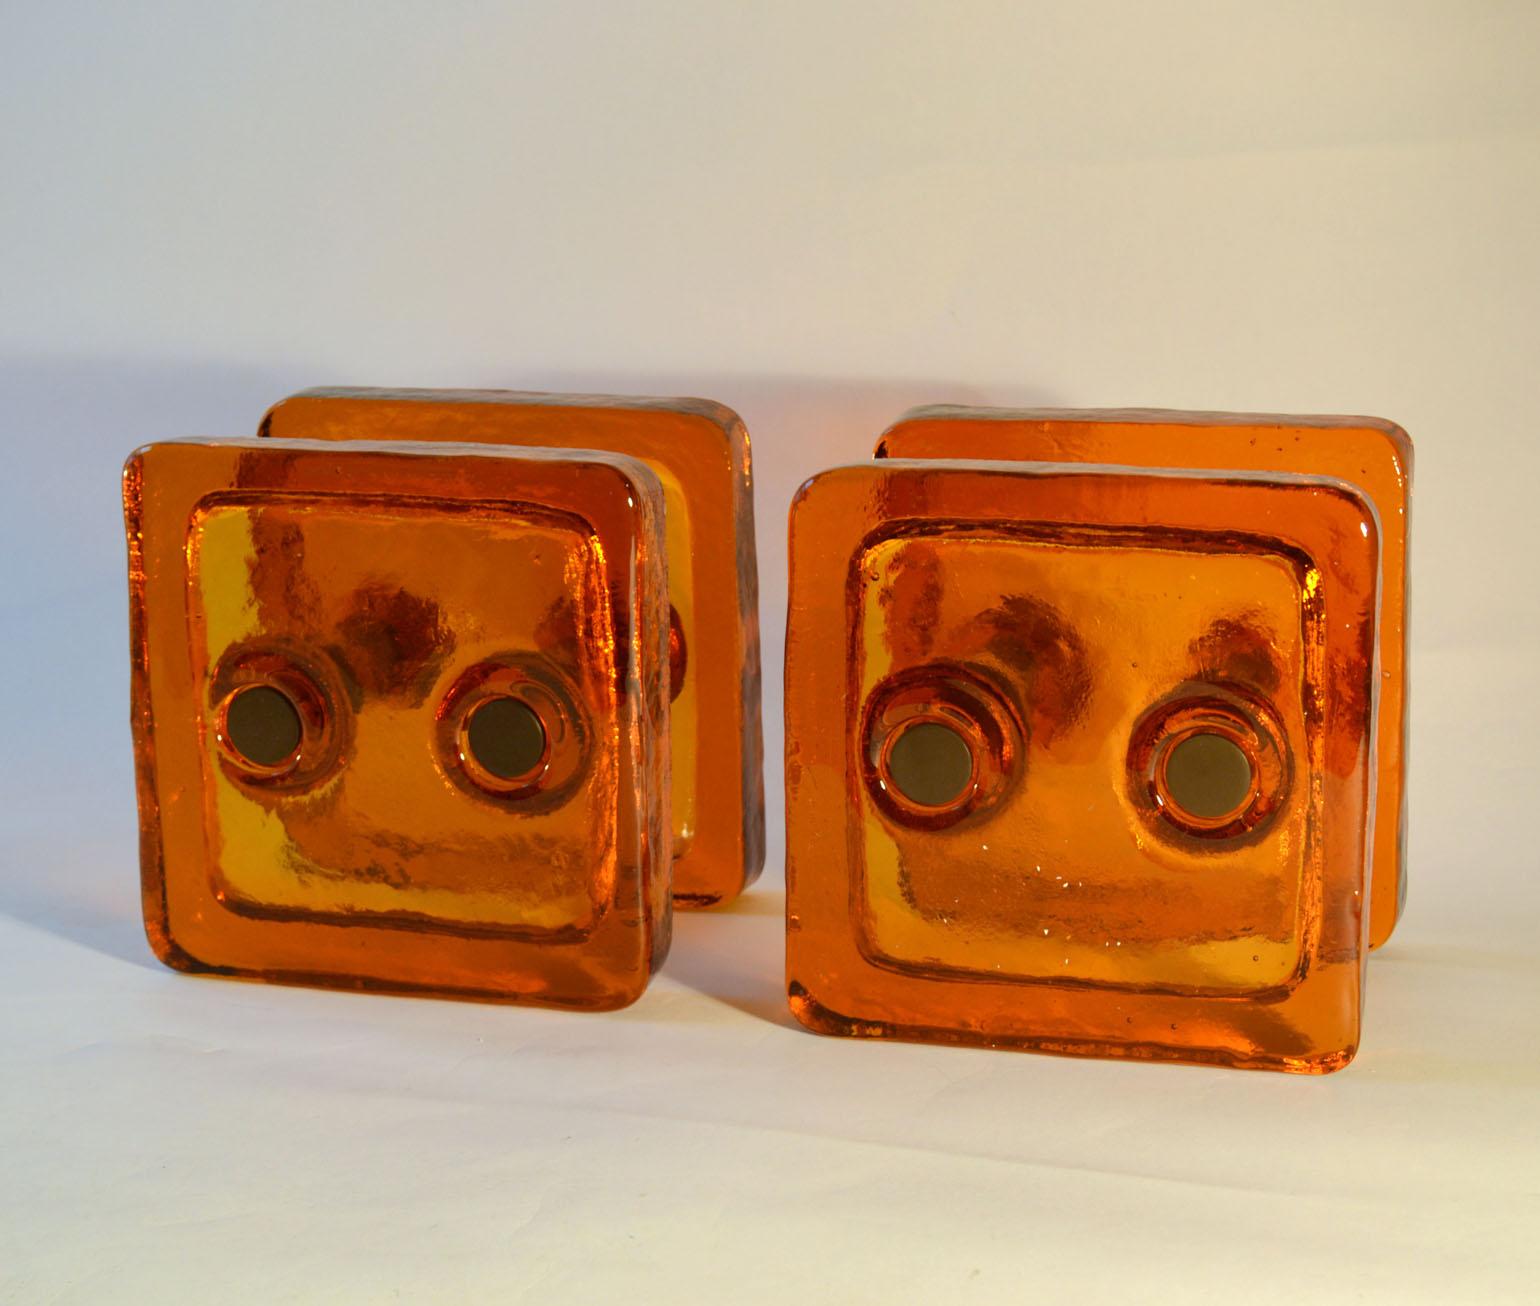 Pair of orange glass cast square glass push and pull door handles with bronze color fittings designed for a glass door, French, 1960's.
The fixings can be adjusted for wooden doors.
Each glass piece;
Measures: 21 x 21 x 3 cm
Distance between the